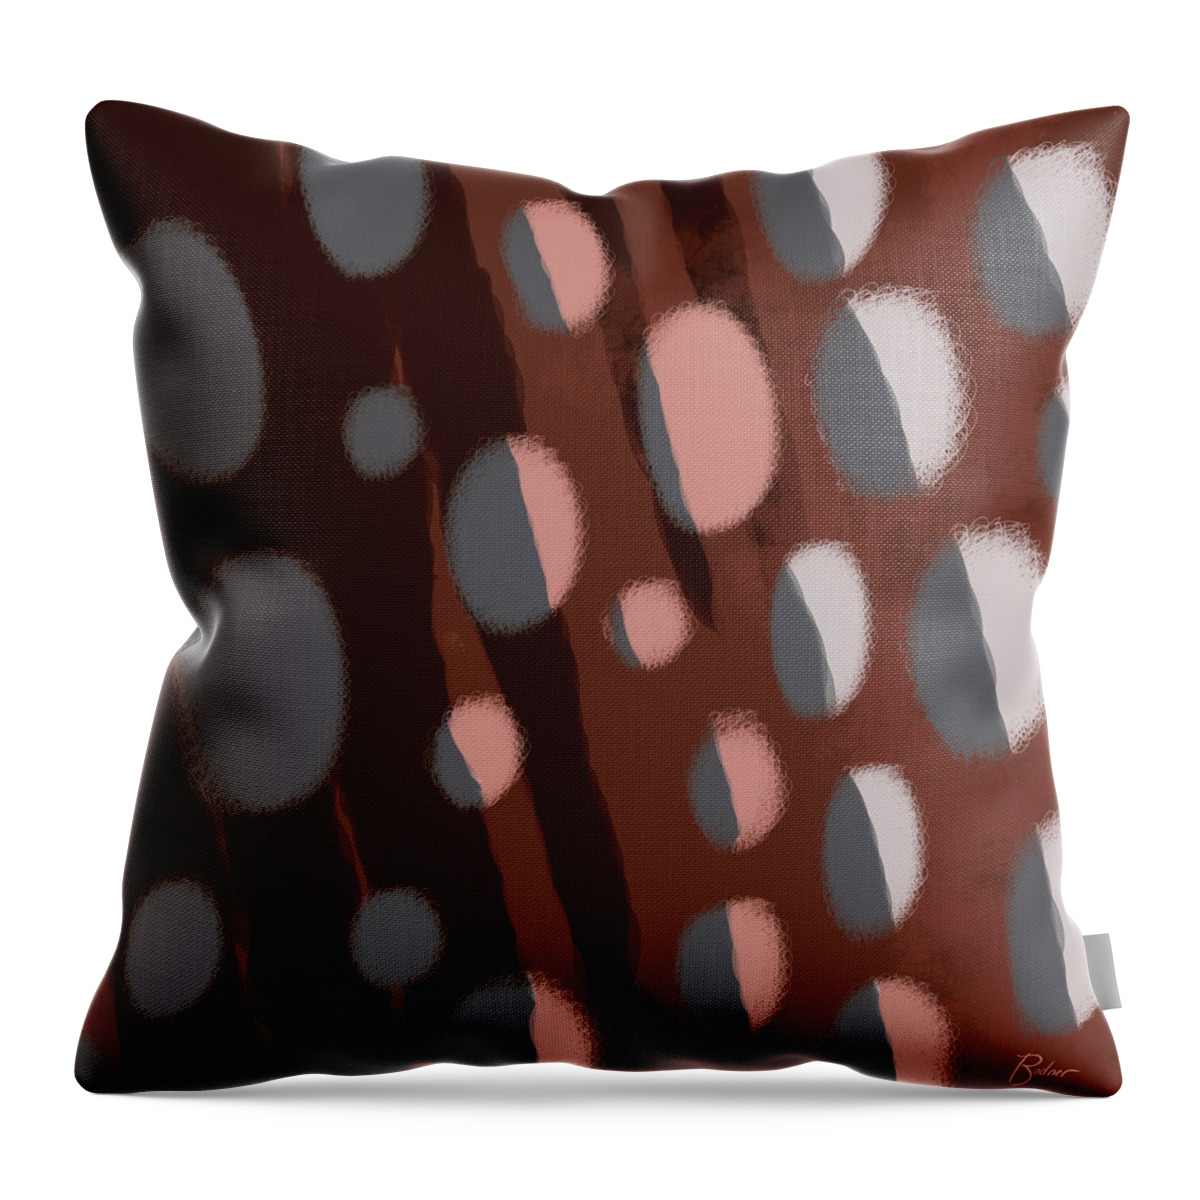  Throw Pillow featuring the digital art Floating by Alan Bodner